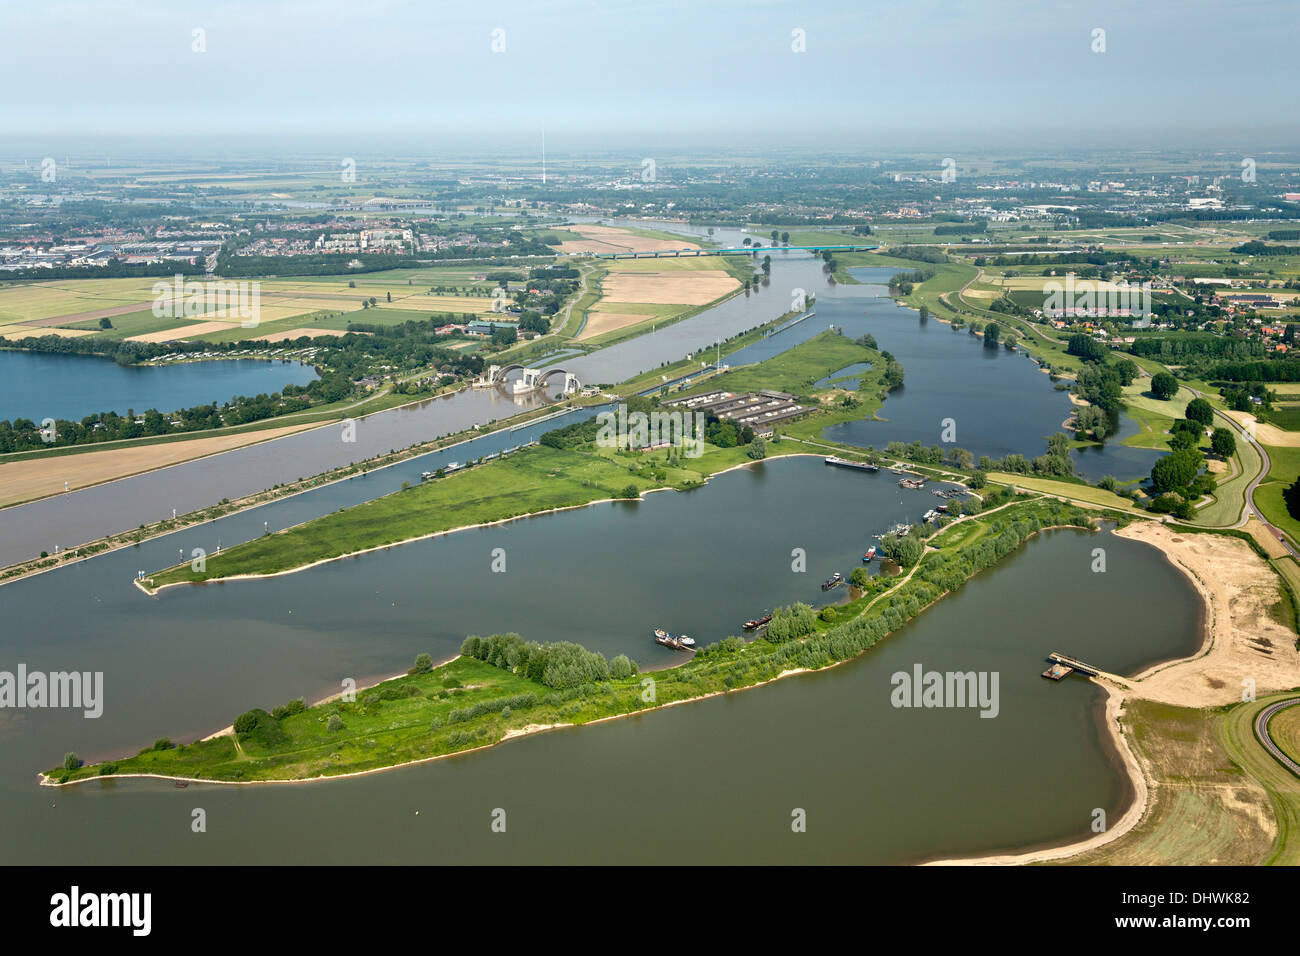 Netherlands, Hagestein. Weir and lock complex in Lek river. Flooded flood plains. Aerial Stock Photo